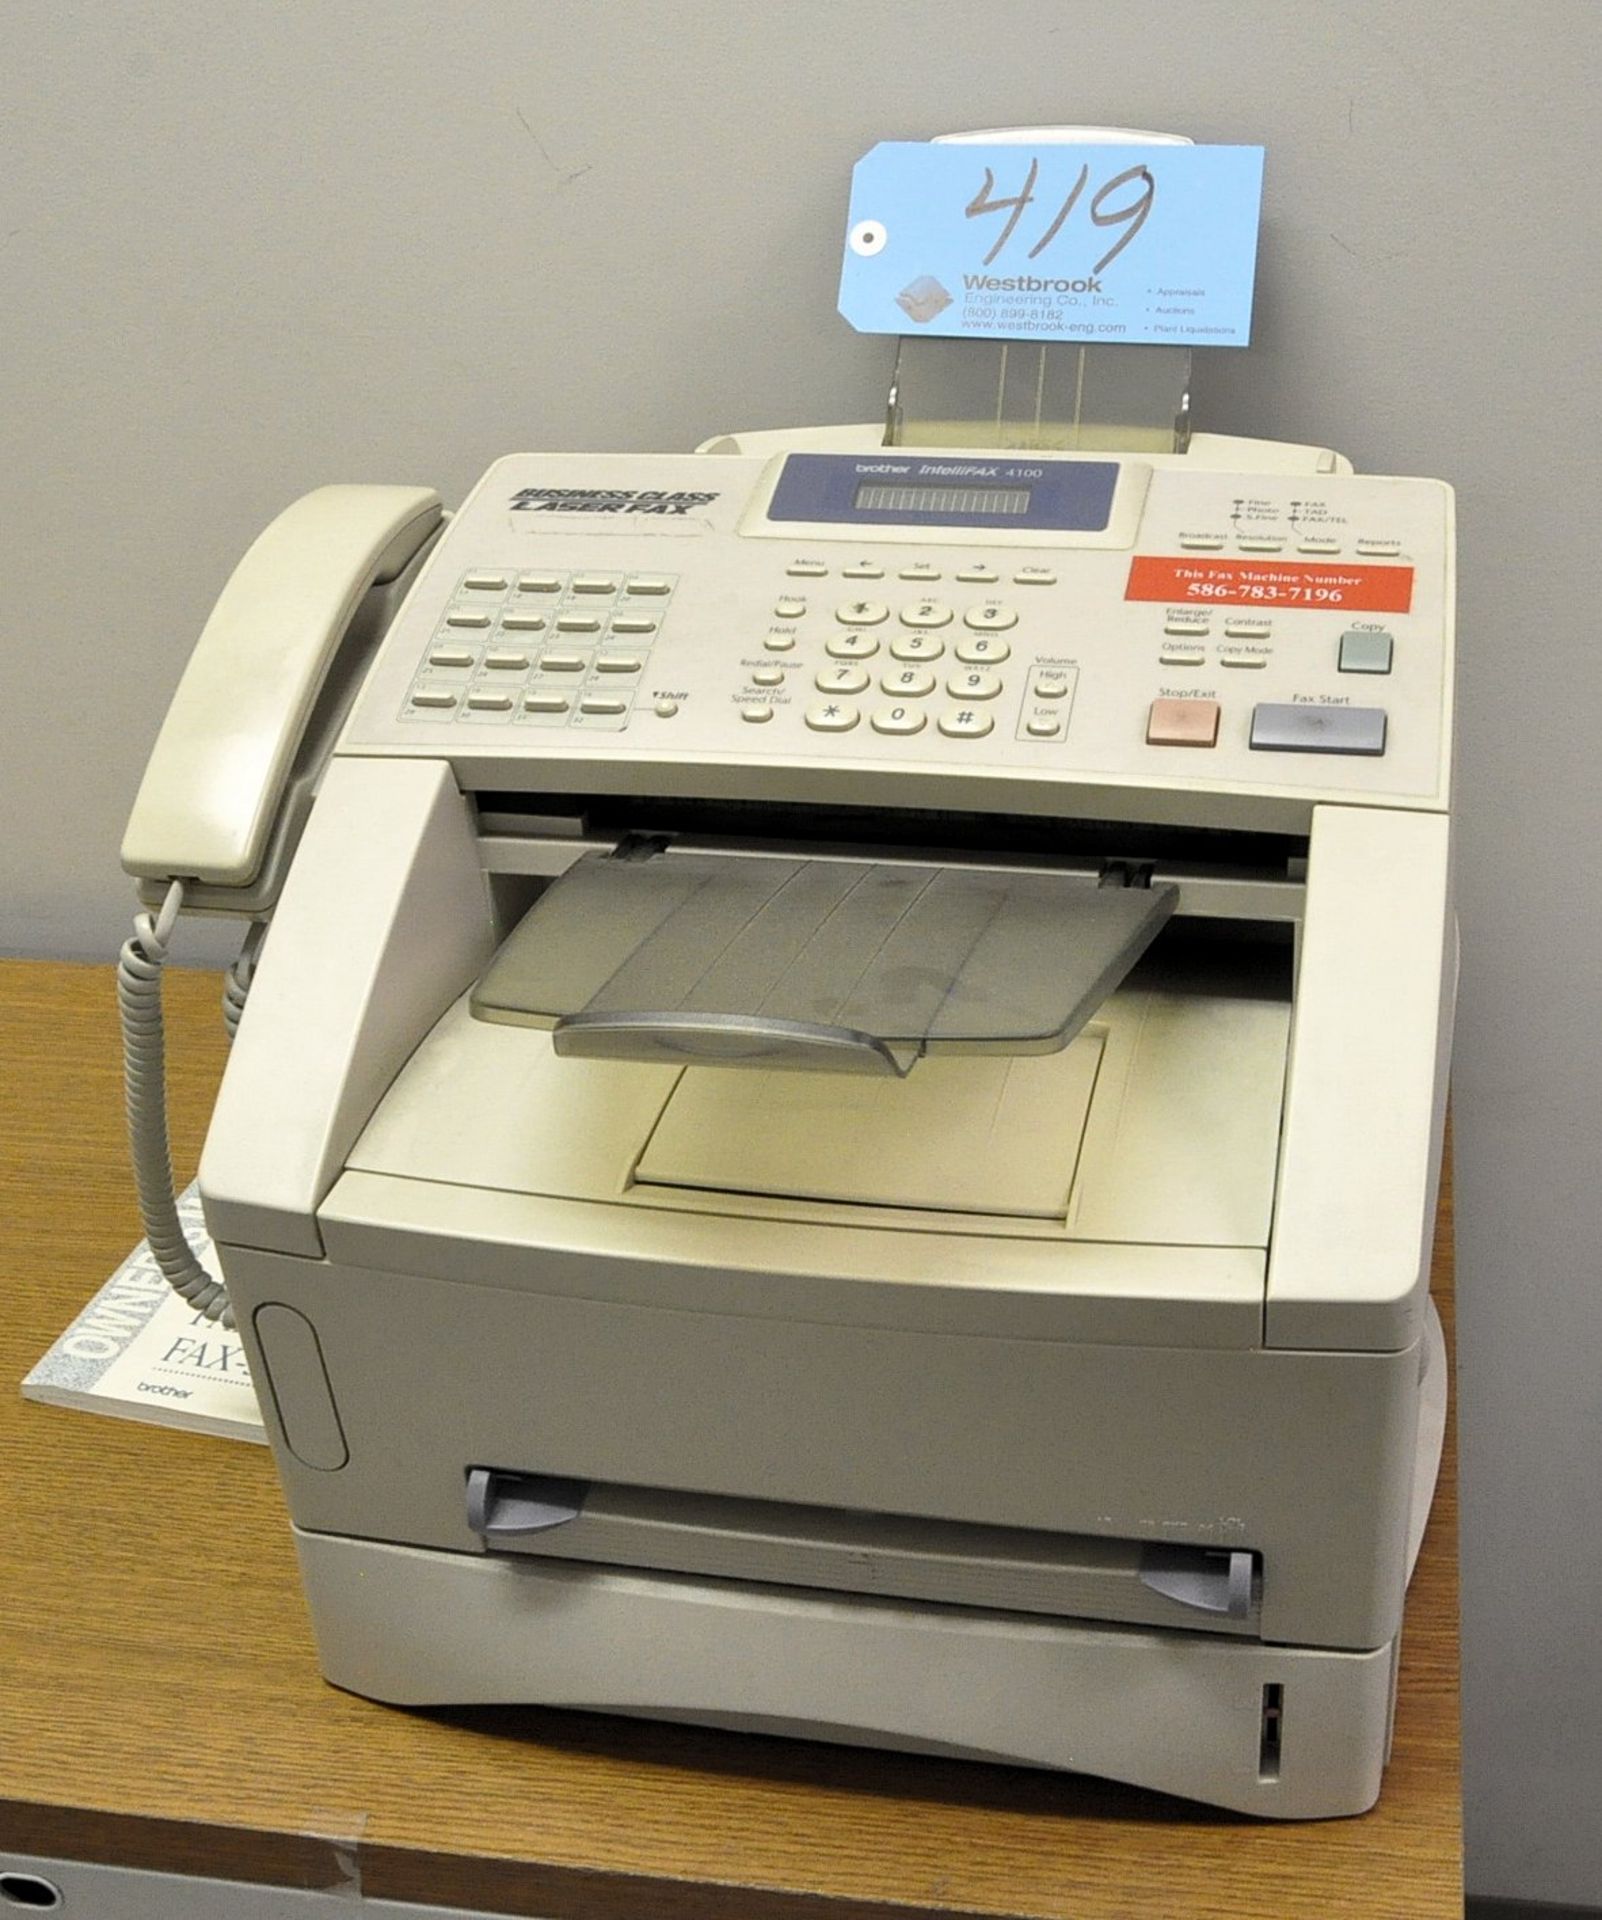 Lot-Brother Intellifax 4100, Fax Machine, Bunn Coffee Maker and 24"